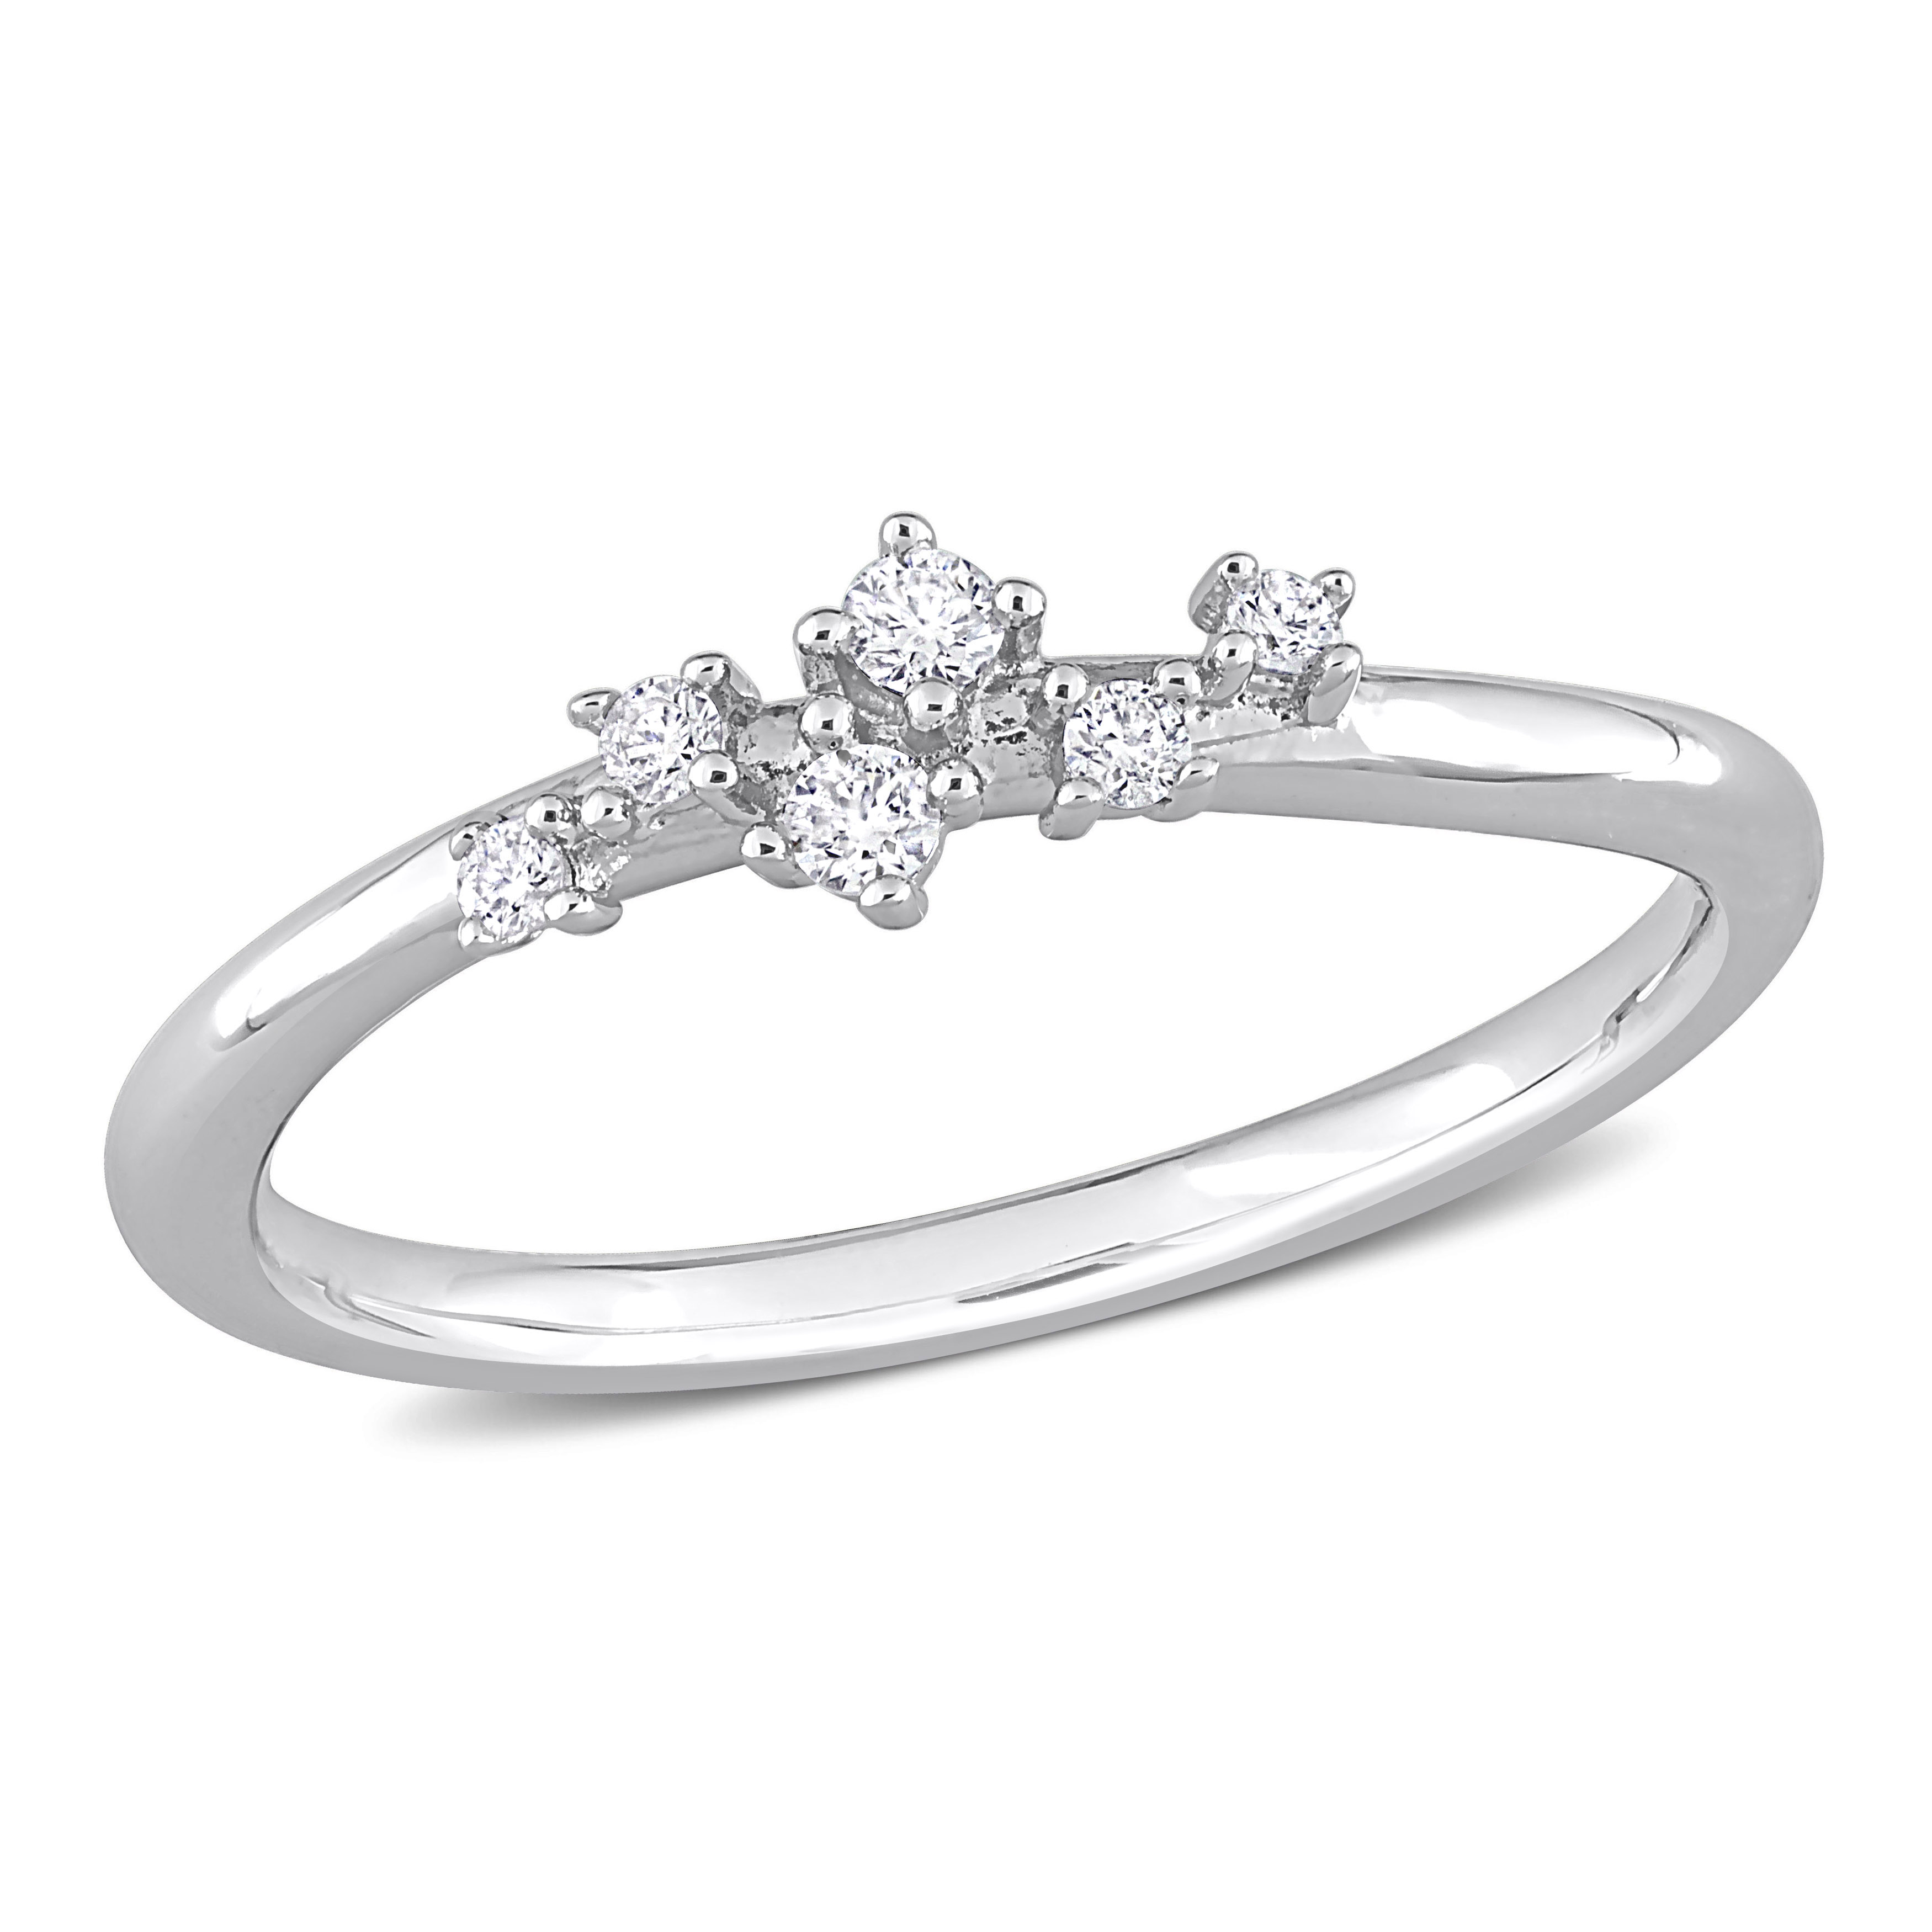 1/10 CT TDW Diamond Cluster Ring in Sterling Silver